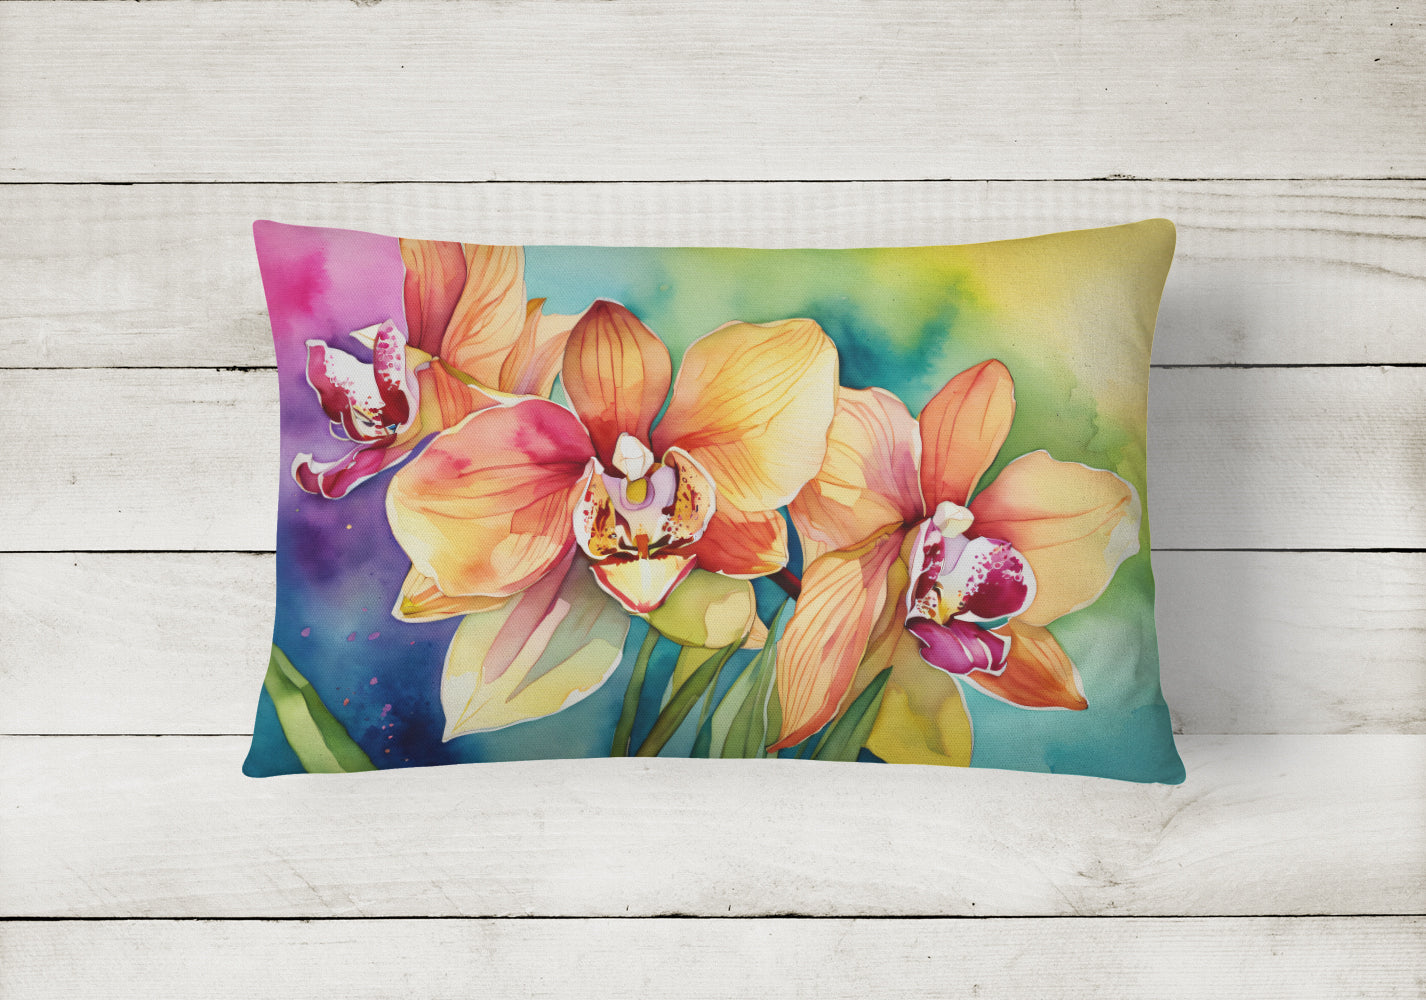 Buy this Orchids in Watercolor Fabric Decorative Pillow